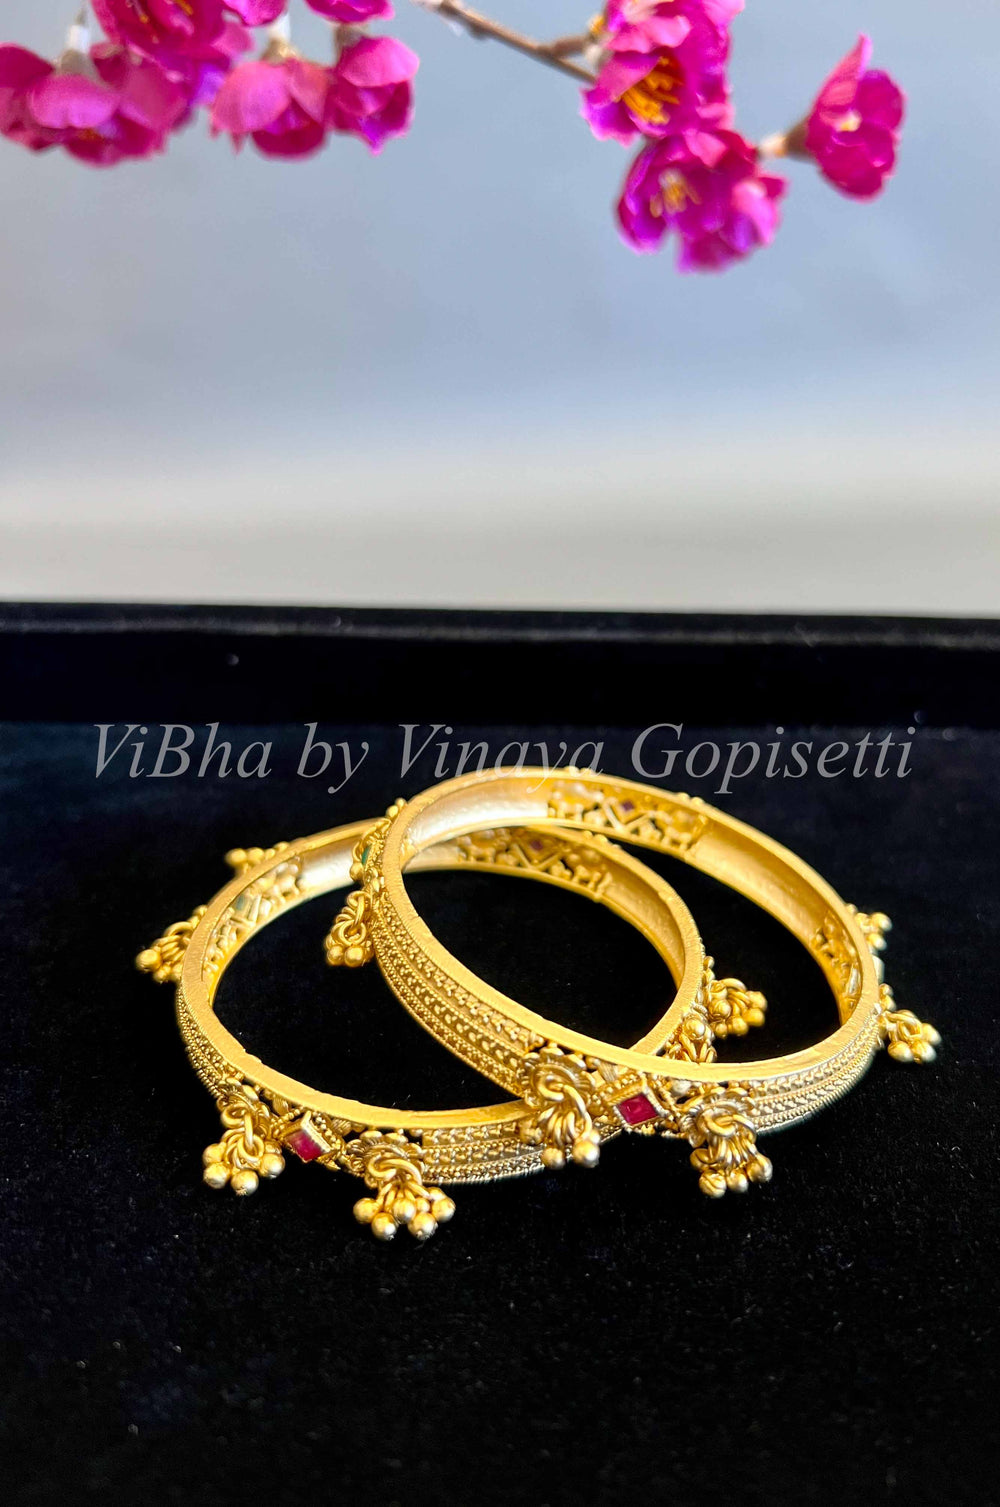 Accessories & Jewelry - Gold Bangles With Ruby And Emerald Stone